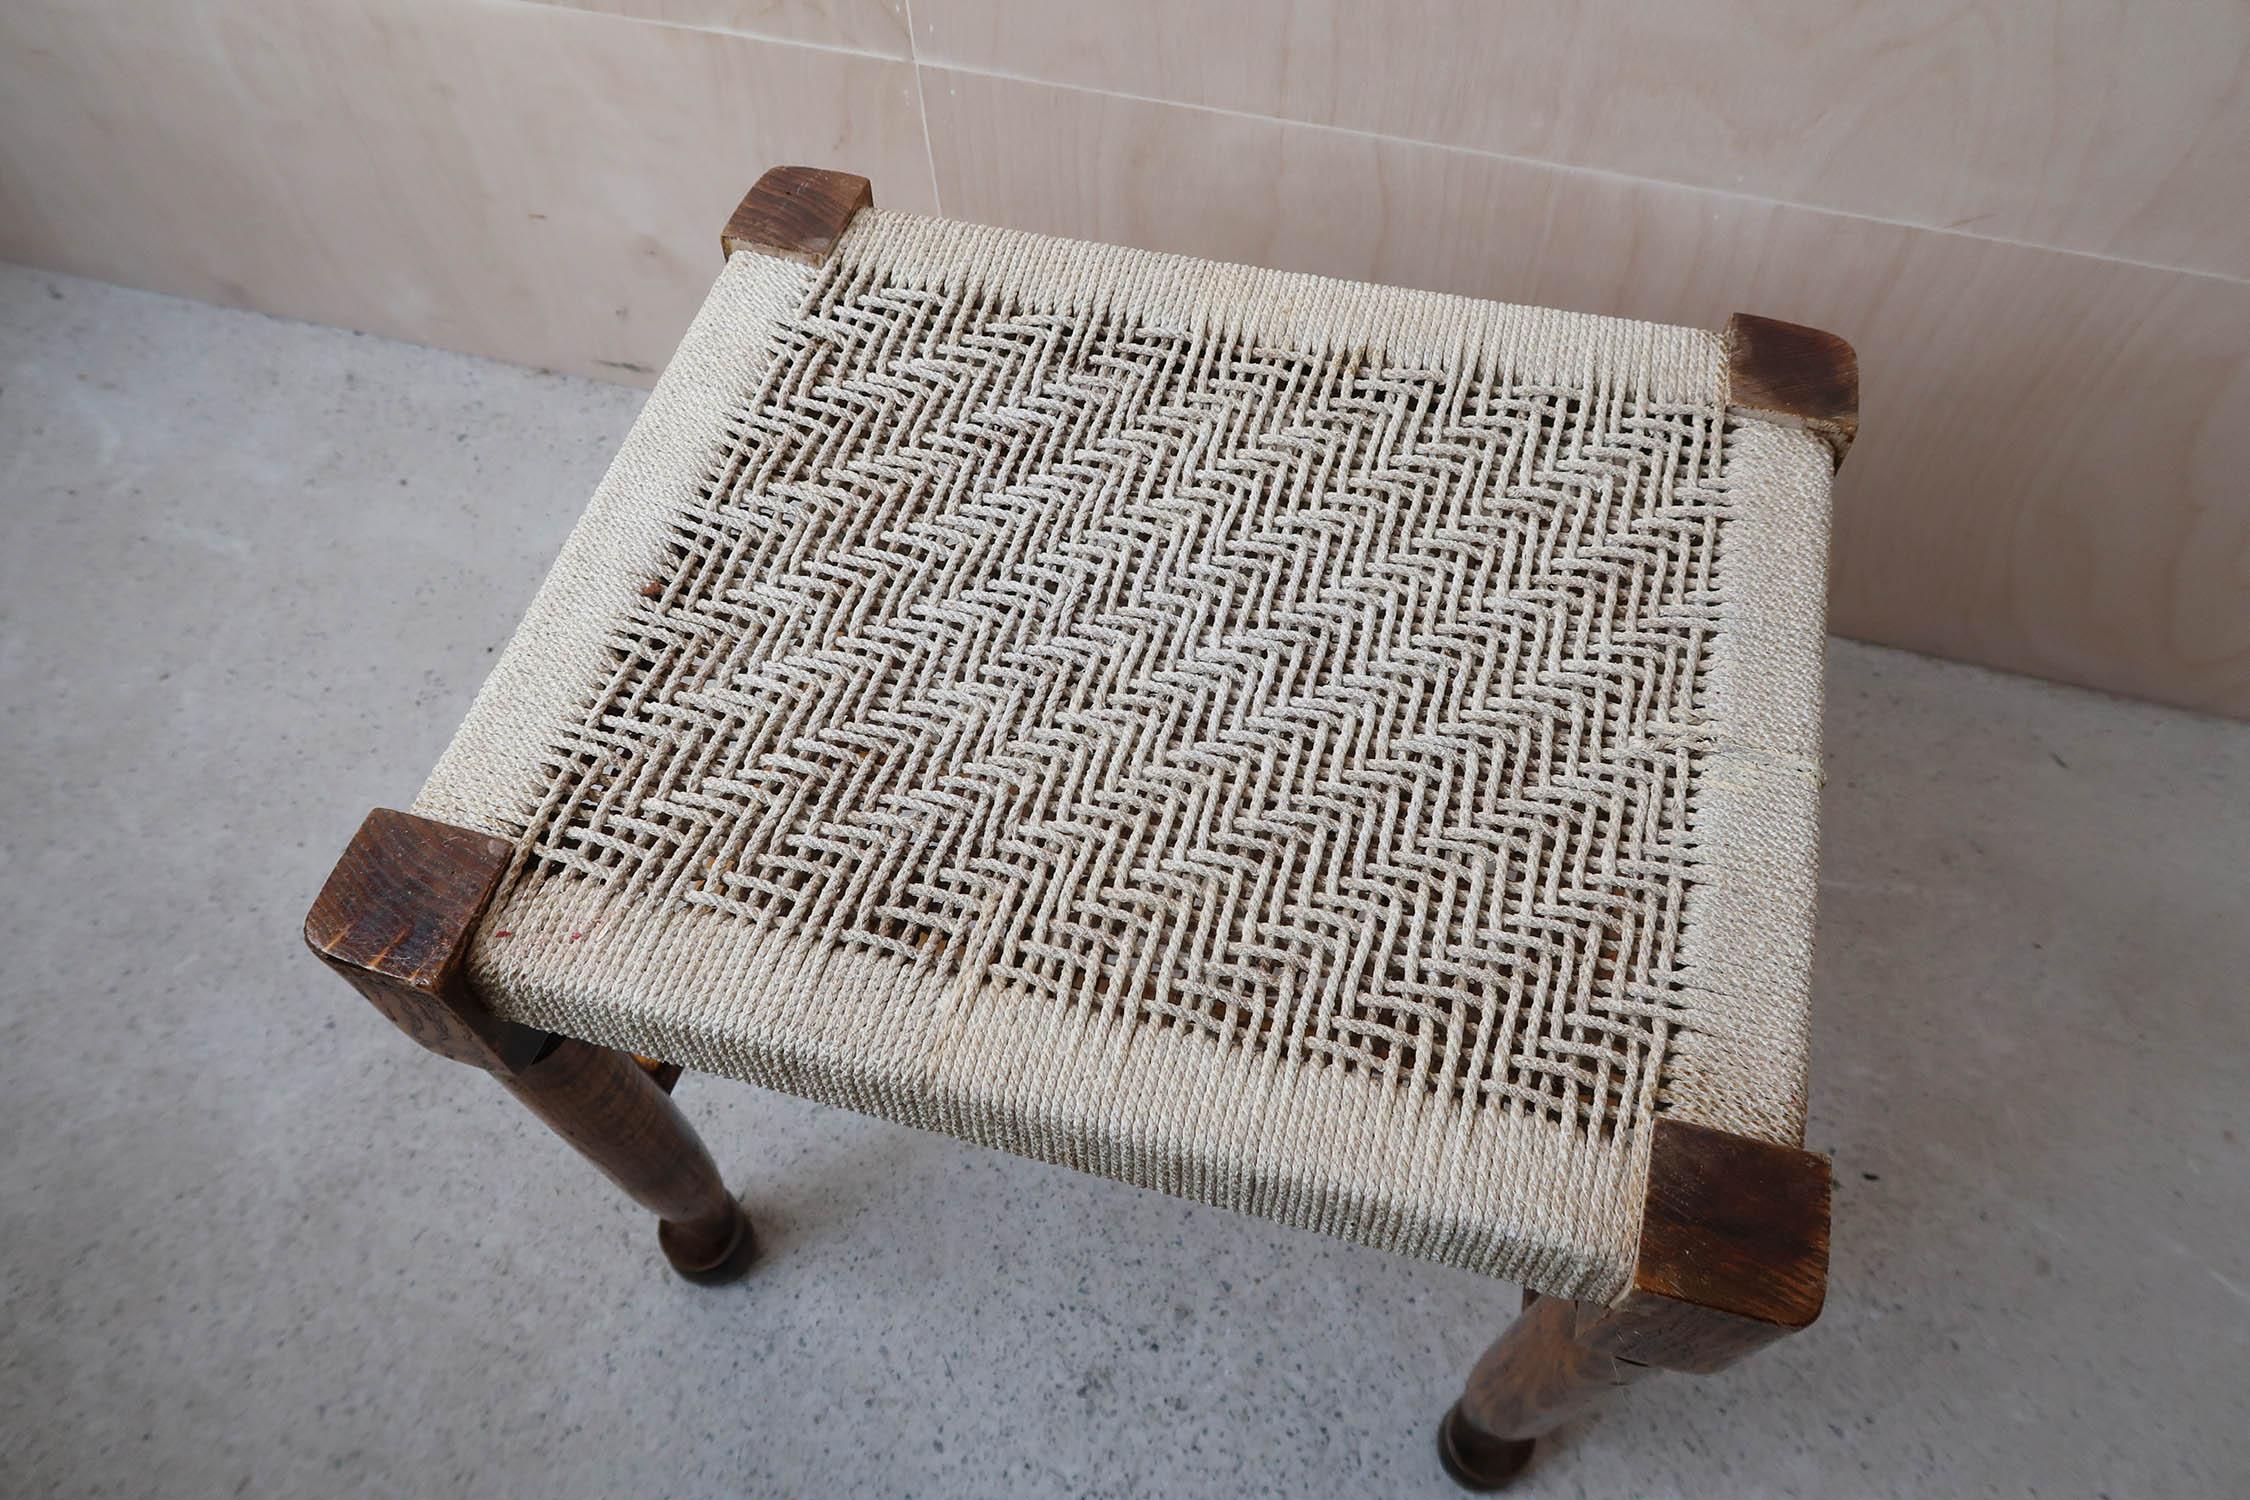 Varnished Vintage Ash and Elm Stool with Rattan or Cord Upholstery